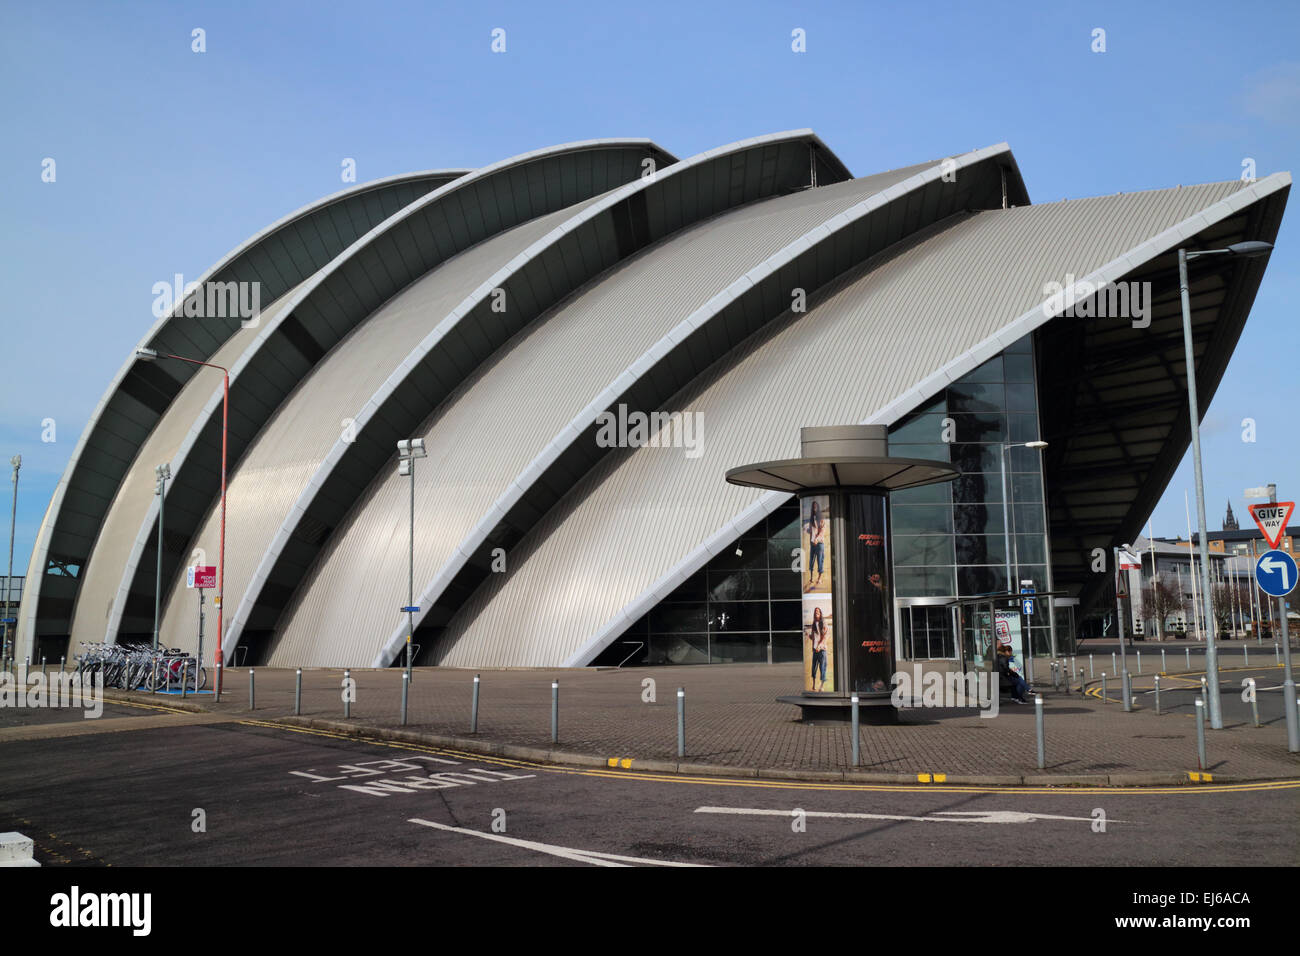 clyde auditorium at the secc scottish exhibition and conference centre Glasgow Scotland uk Stock Photo